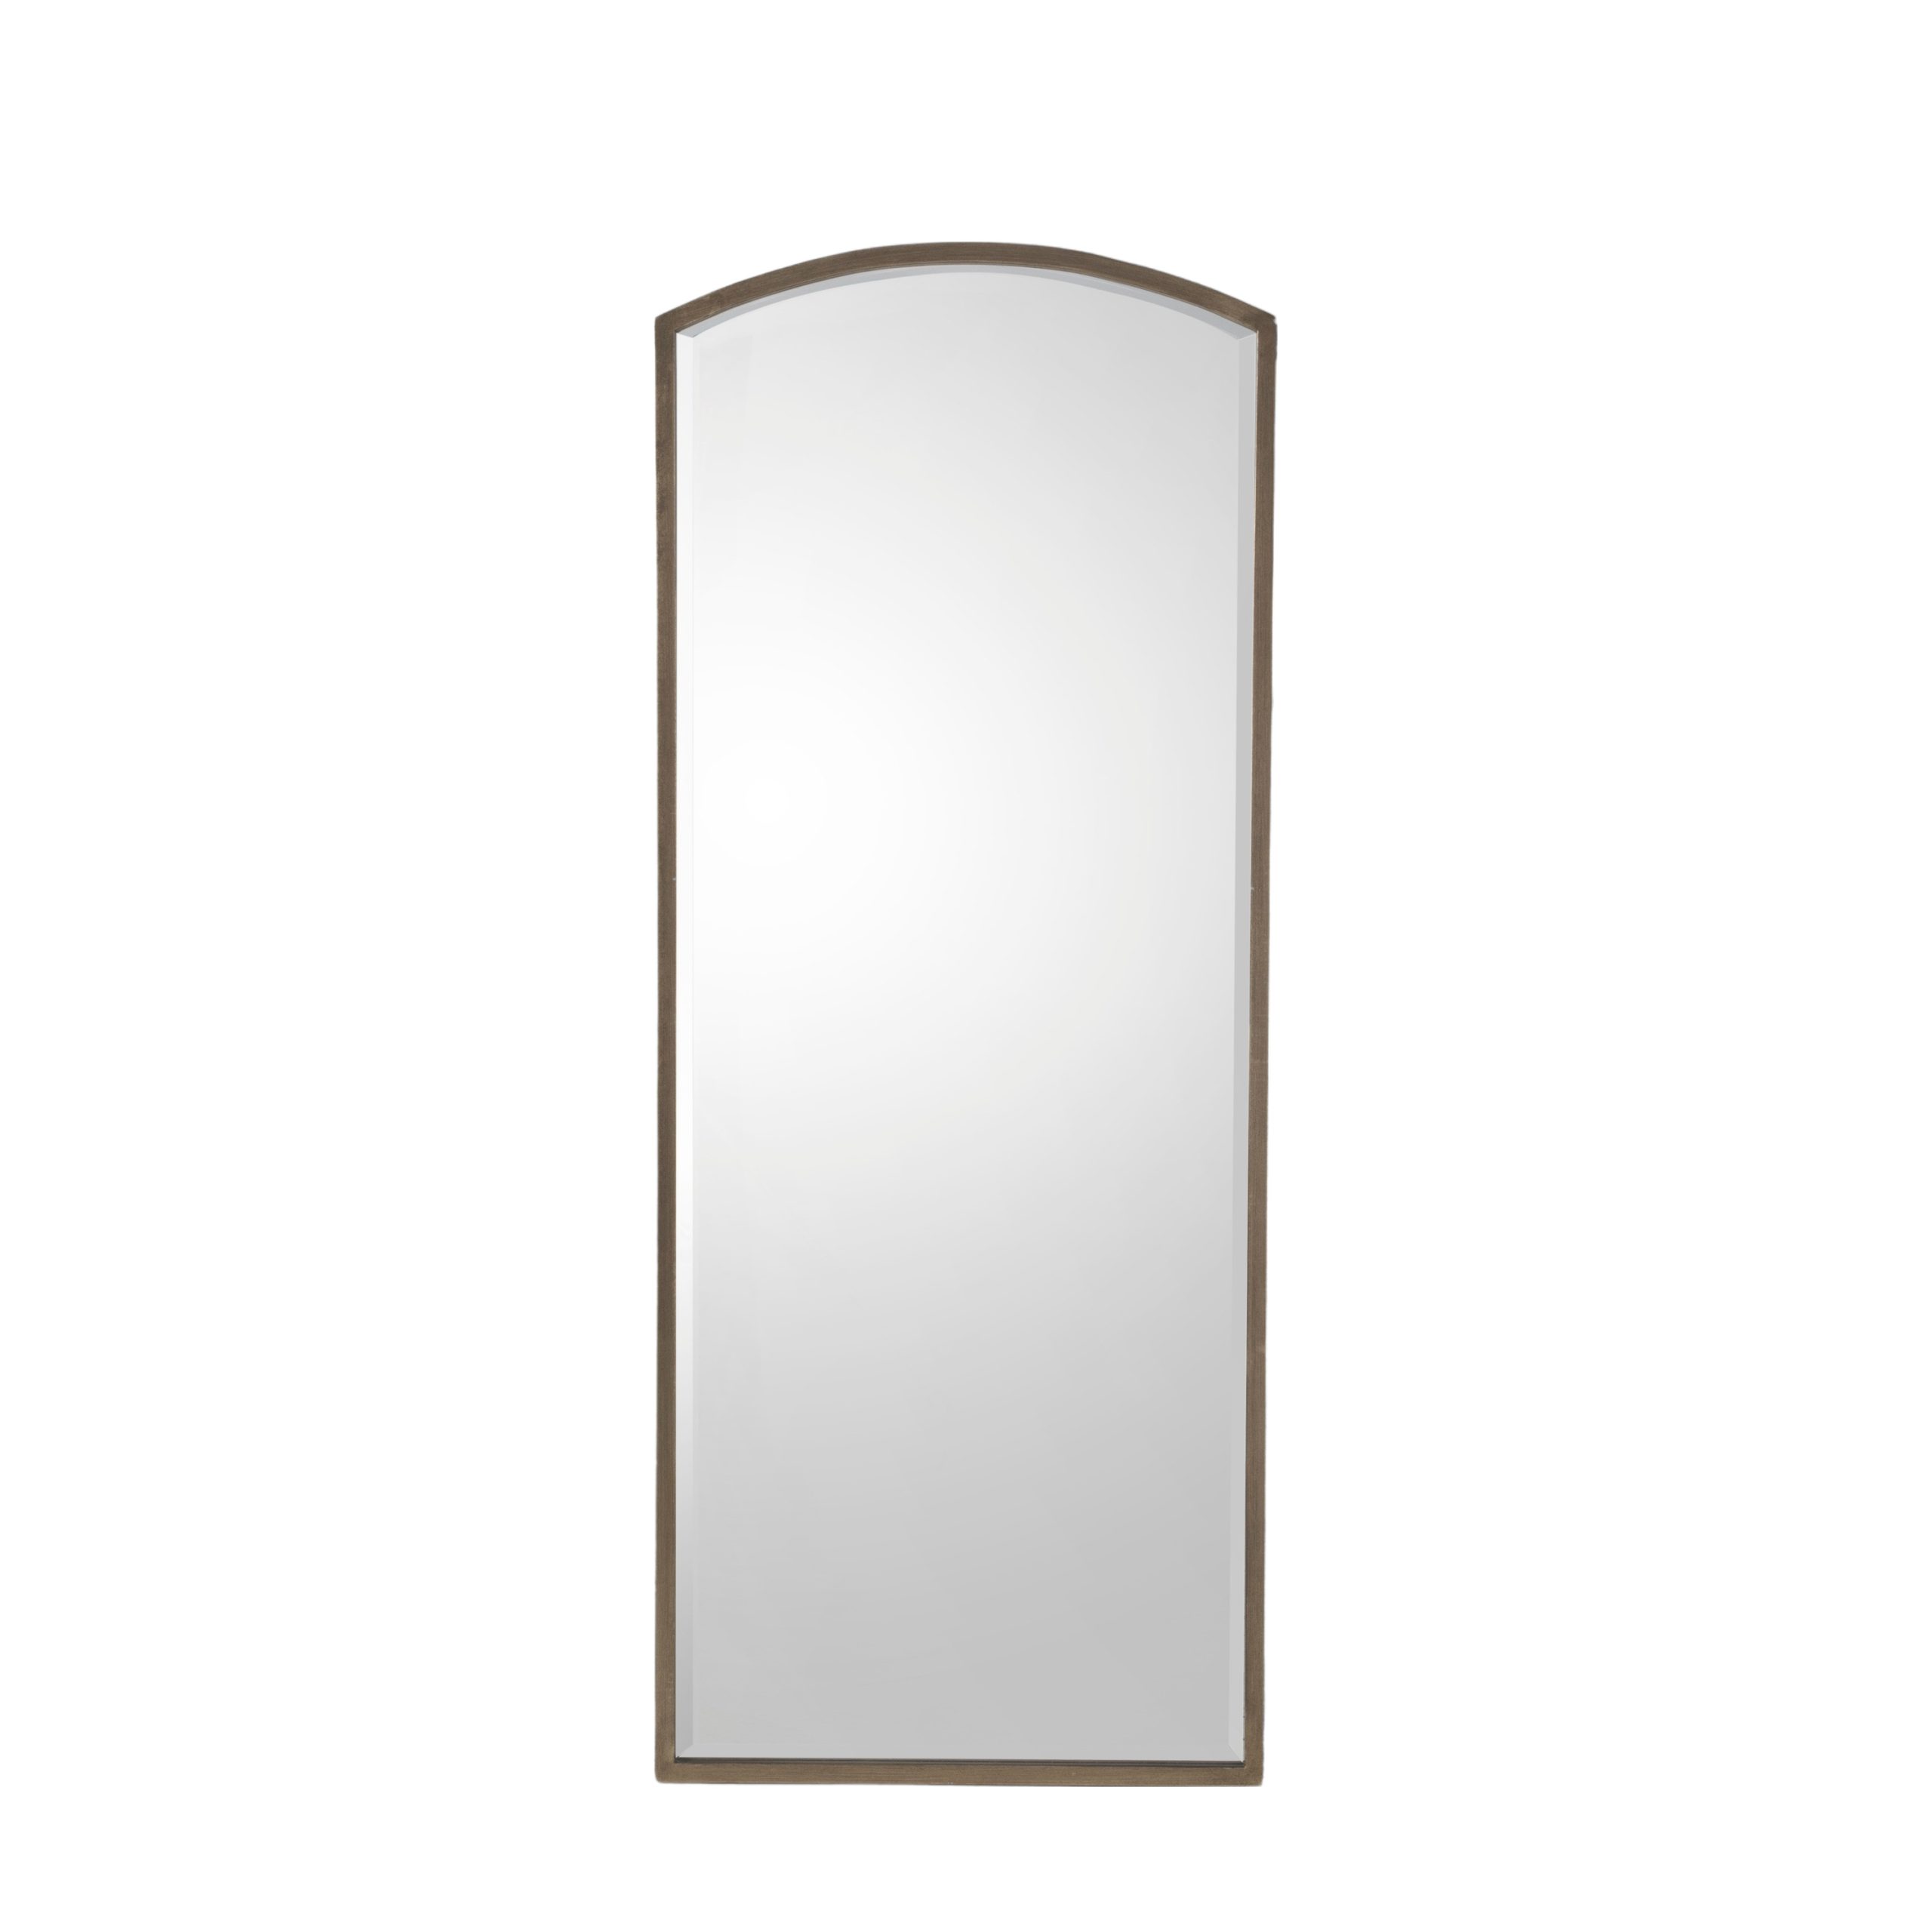 Gallery Direct Higgins Arch Mirror Antique Silver | Shackletons